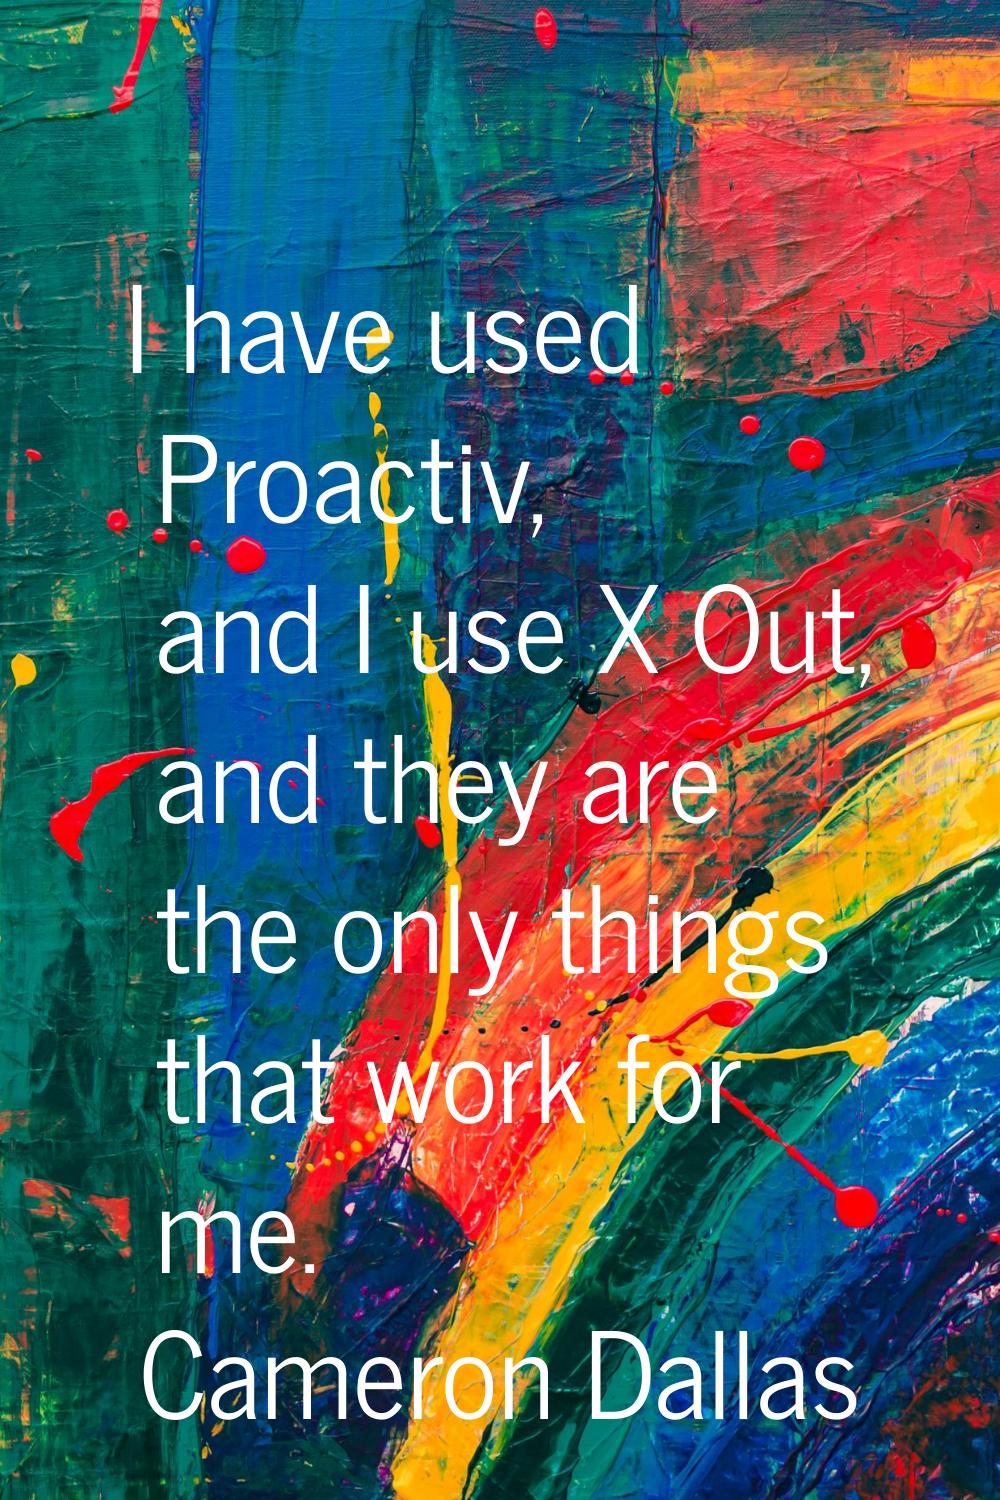 I have used Proactiv, and I use X Out, and they are the only things that work for me.